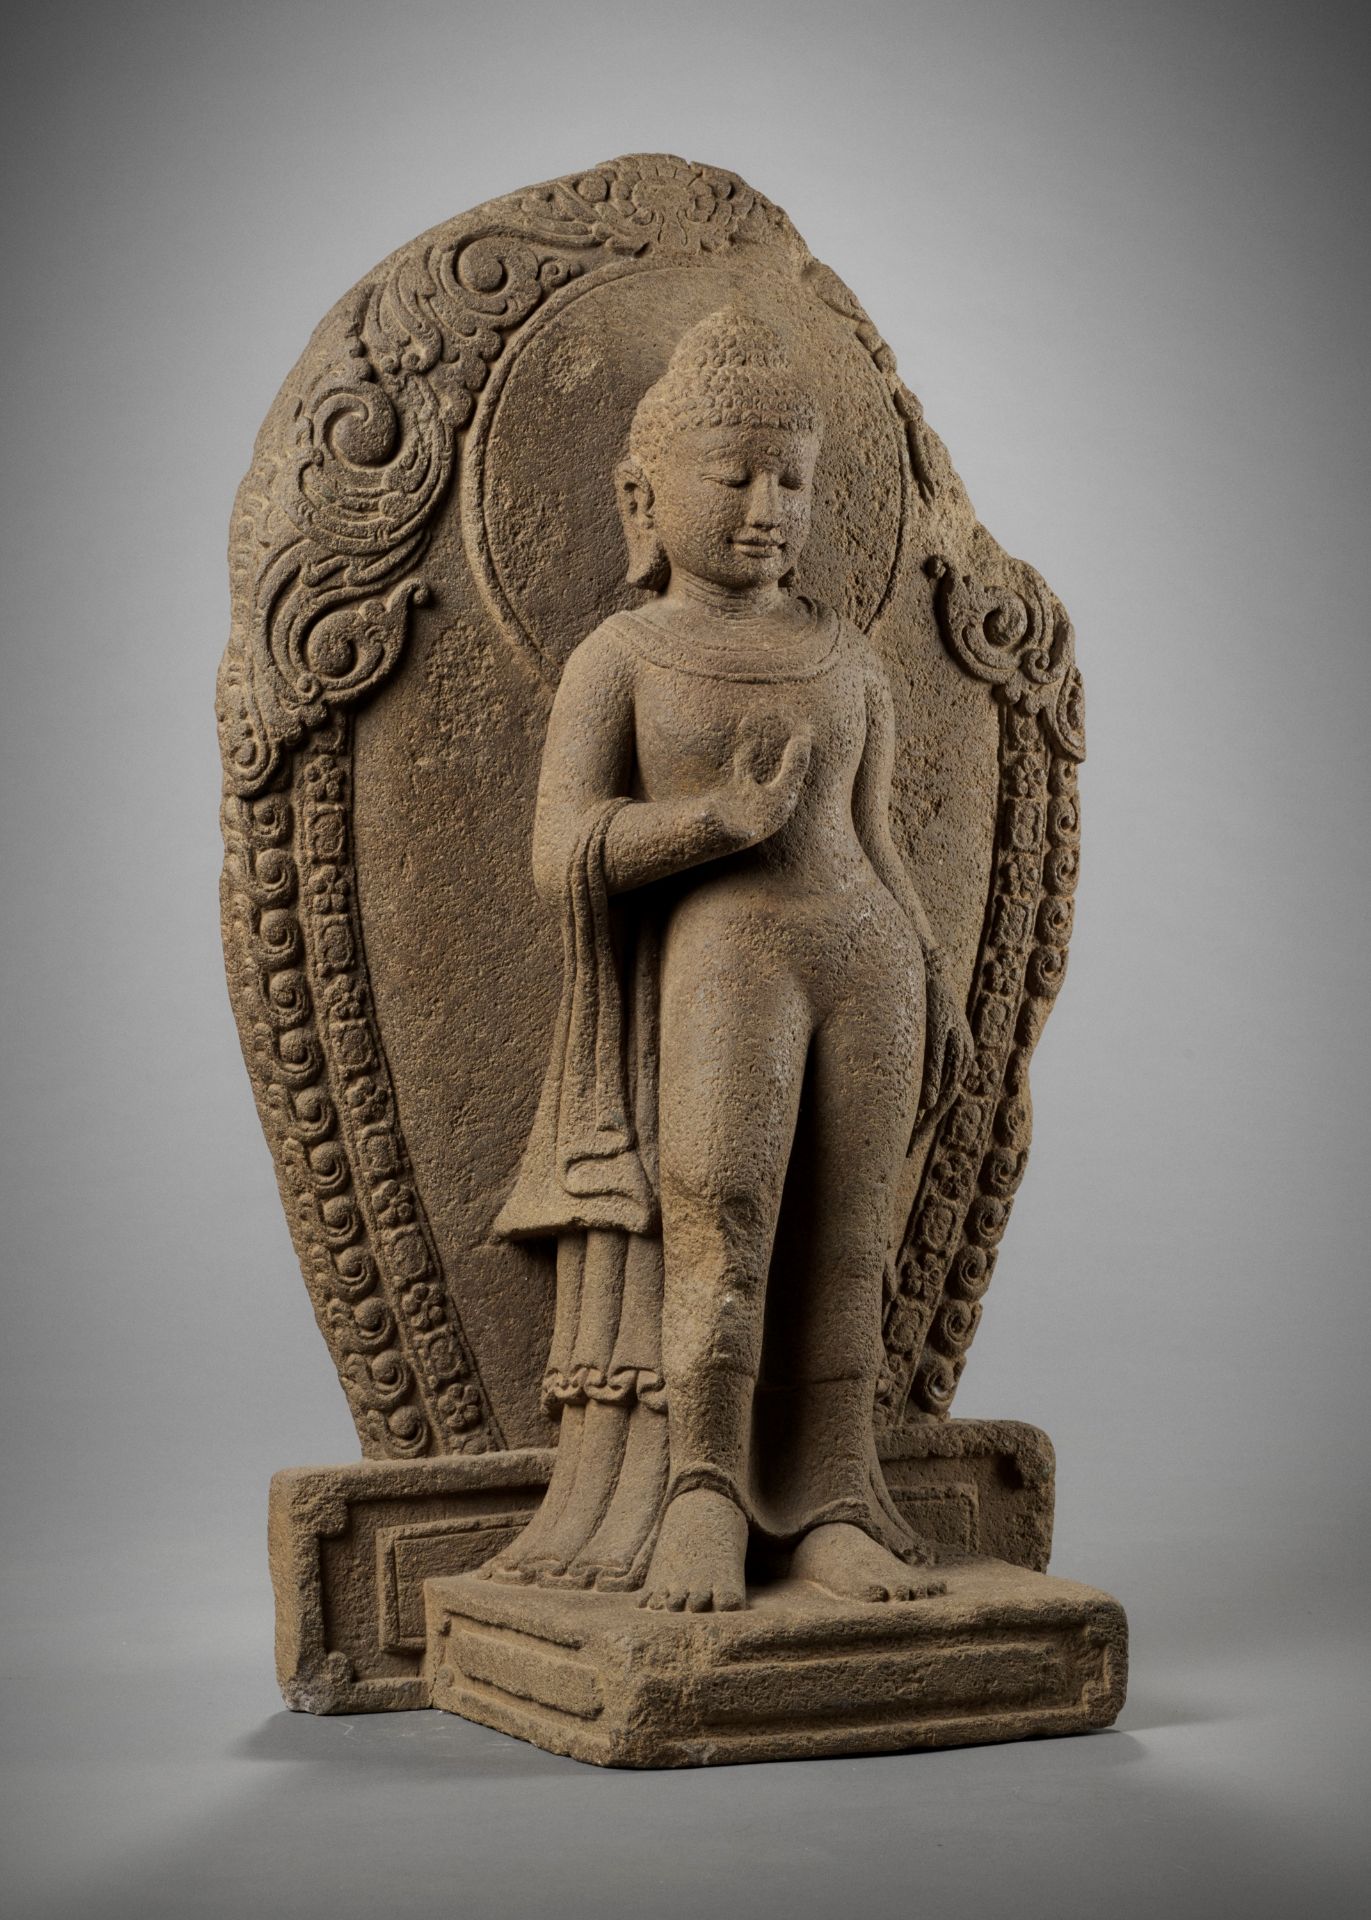 A RARE ANDESITE STATUE OF BUDDHA, CENTRAL JAVA, 9TH CENTURY